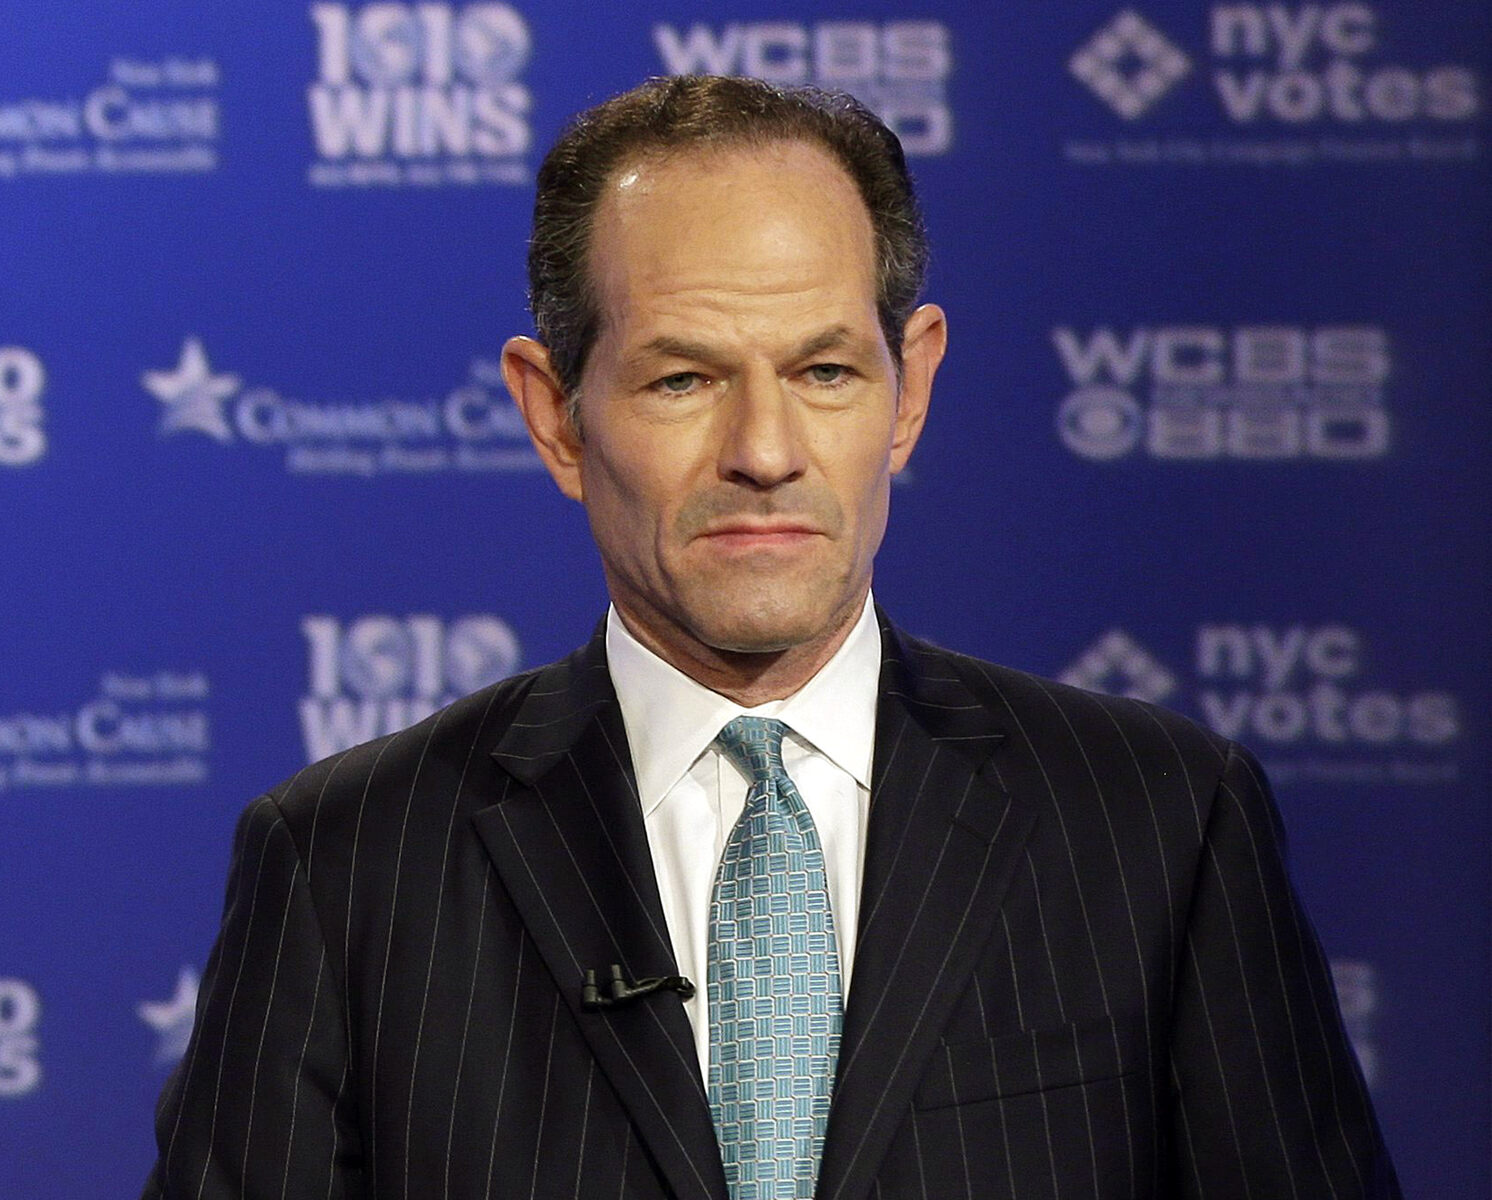 23-mind-blowing-facts-about-eliot-spitzer